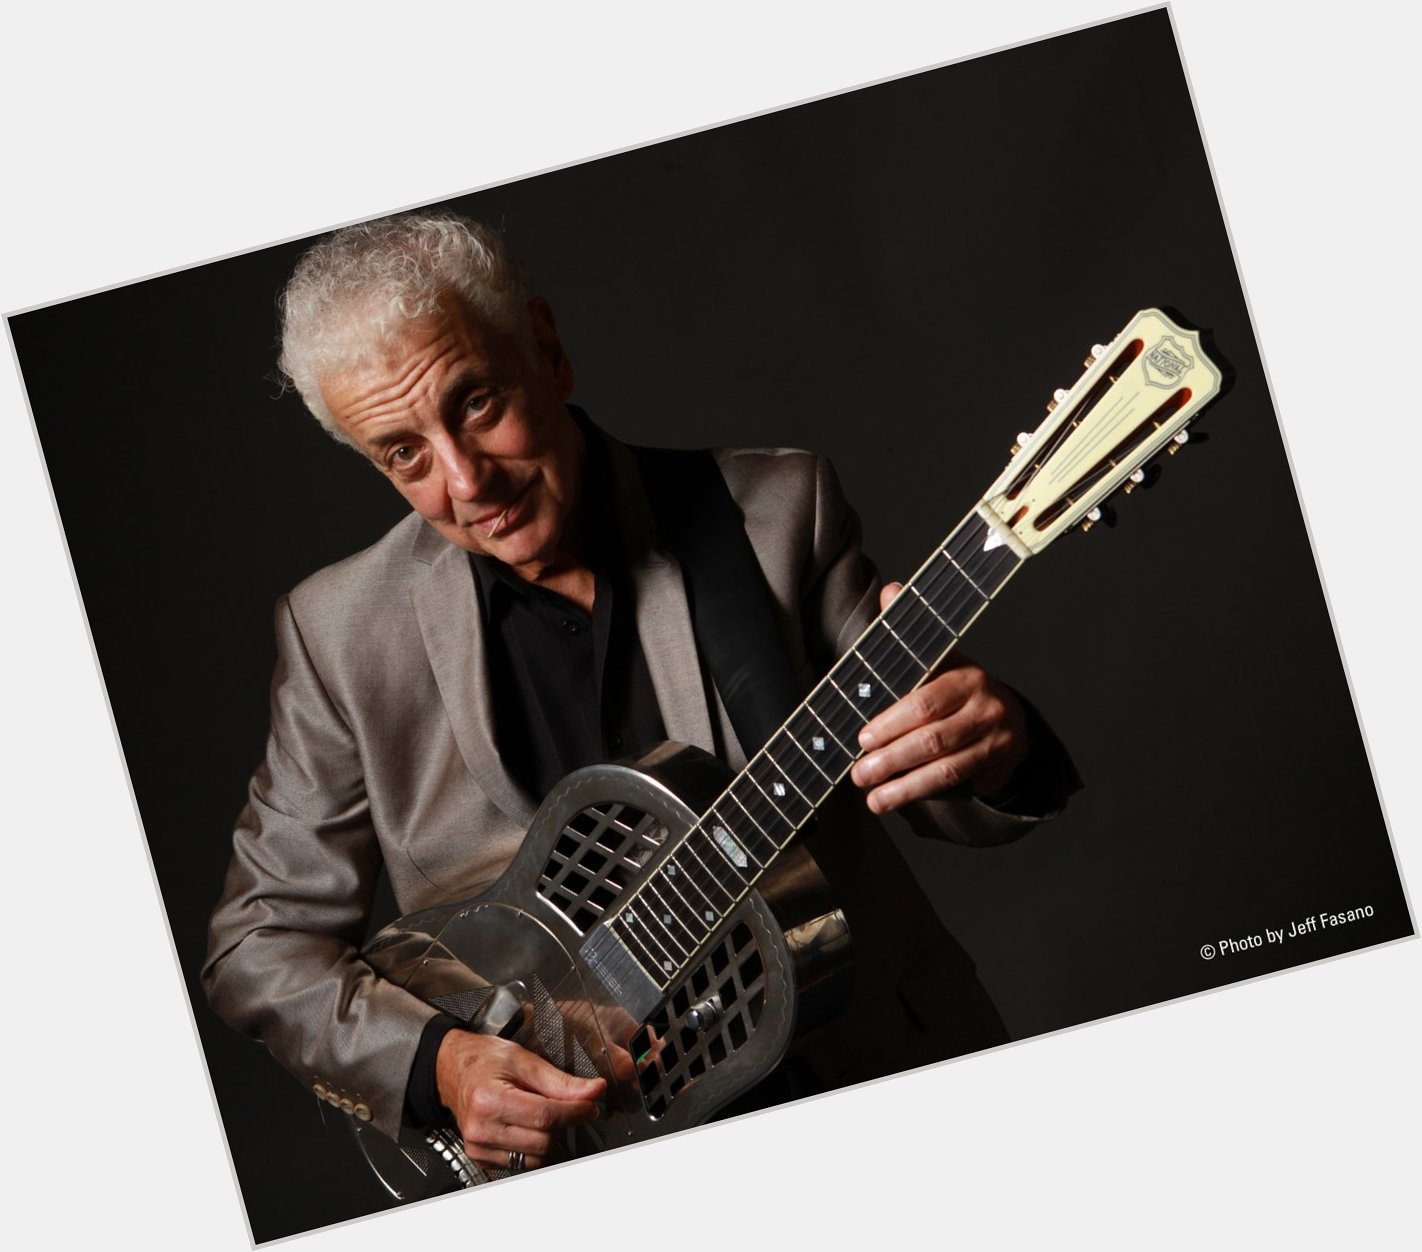 Please join me here at in wishing the one and only Doug MacLeod a very Happy 75th Birthday today  